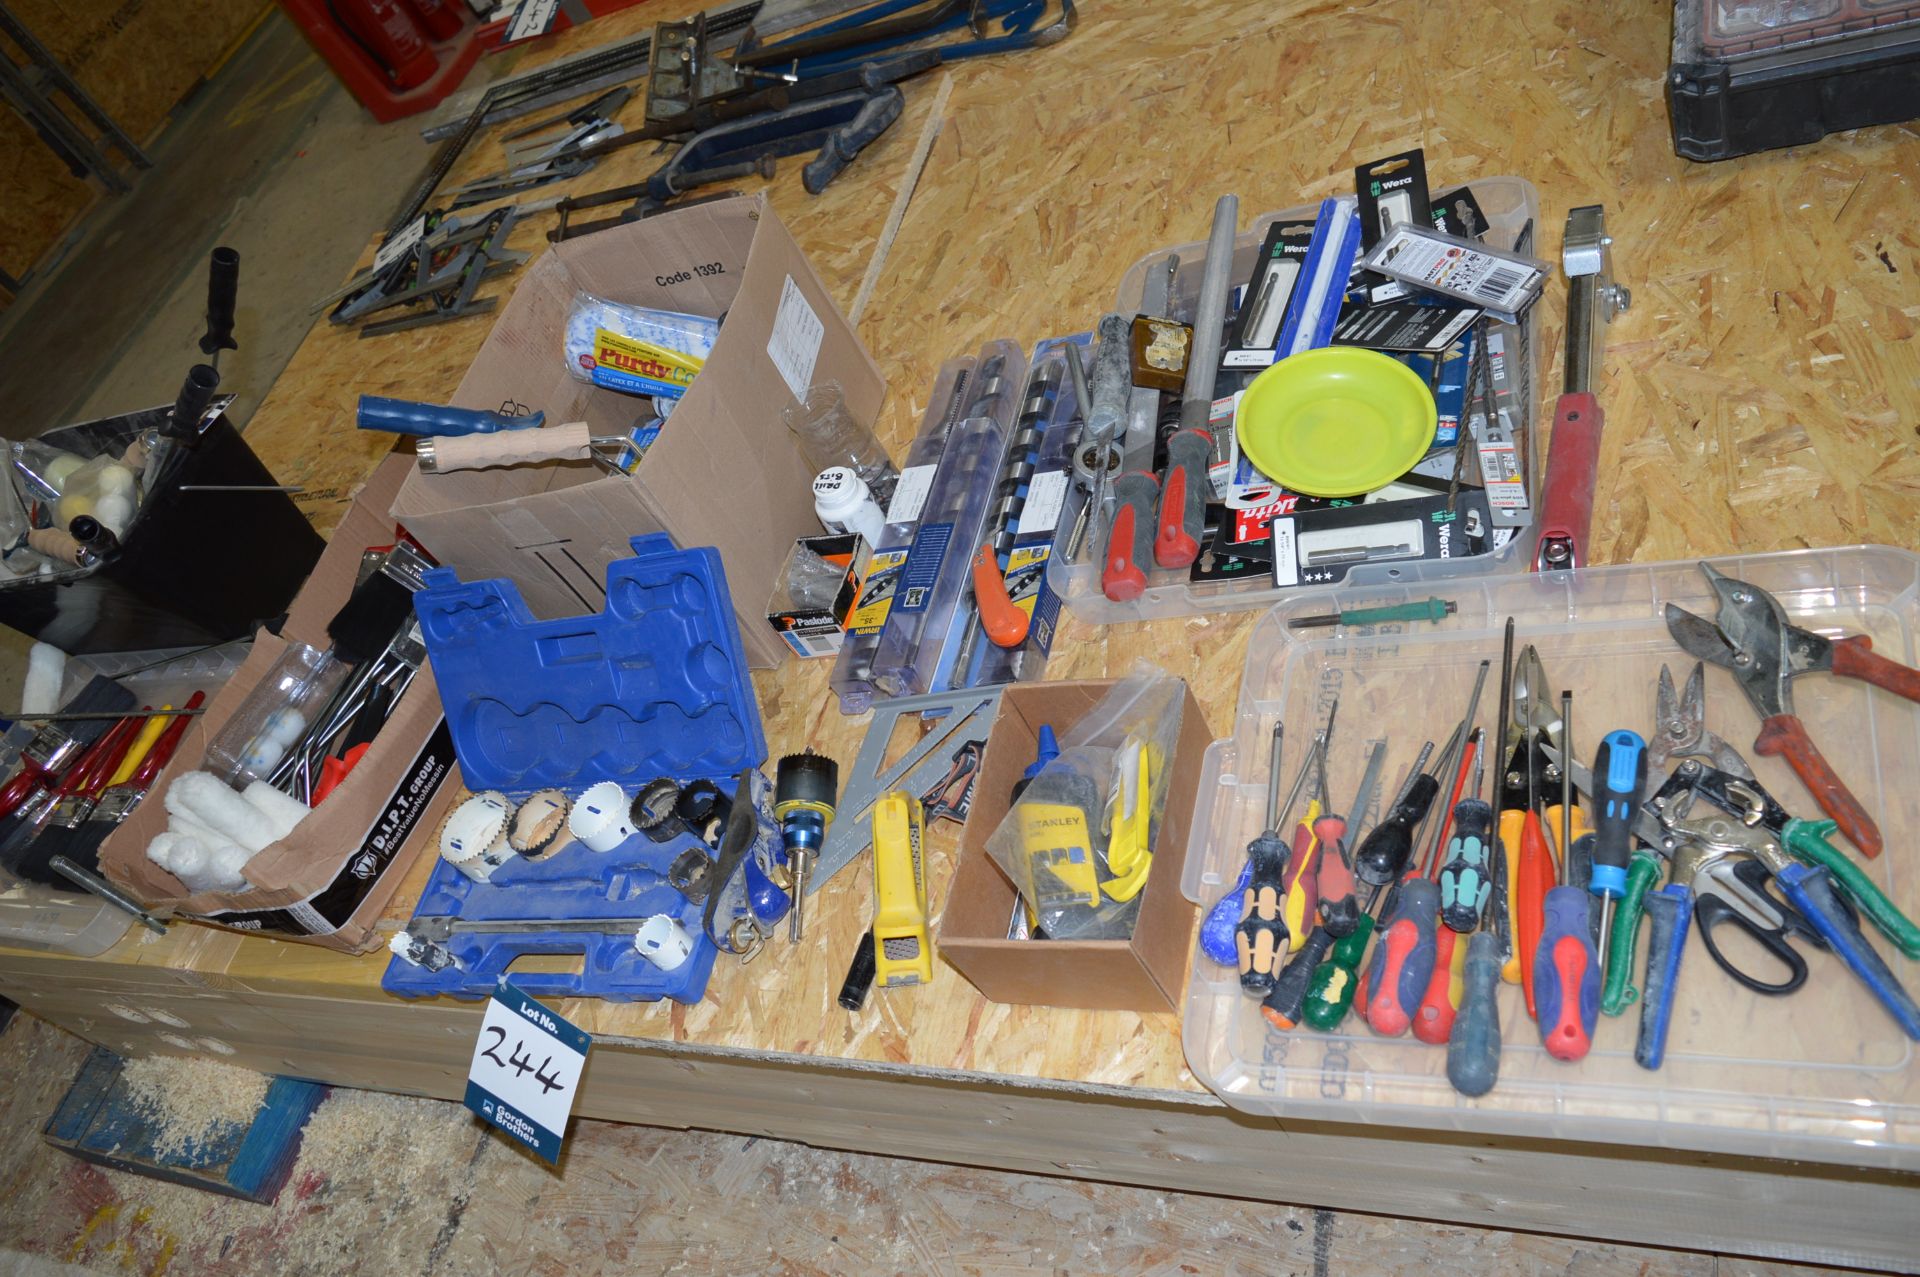 Quantity of hand tools, paint brushes, rollers, etc.